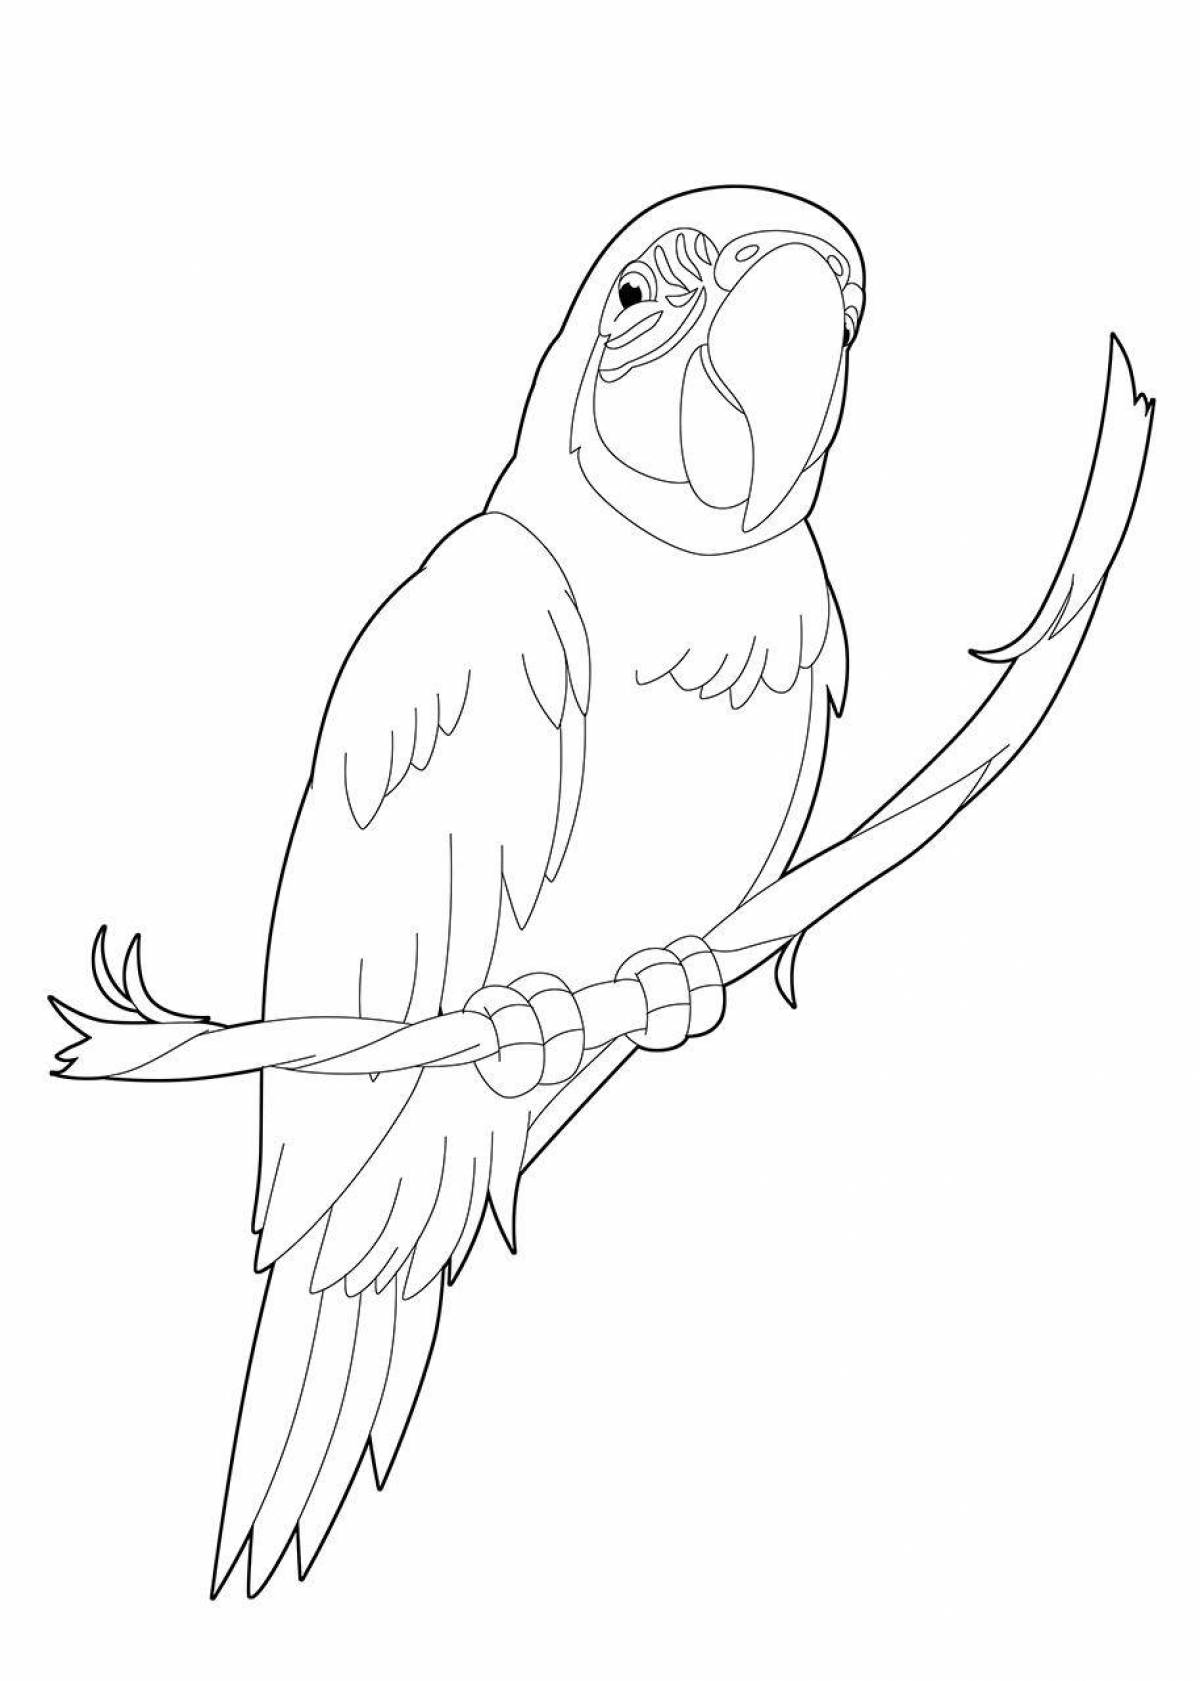 Colorful macaw parrot coloring page for kids